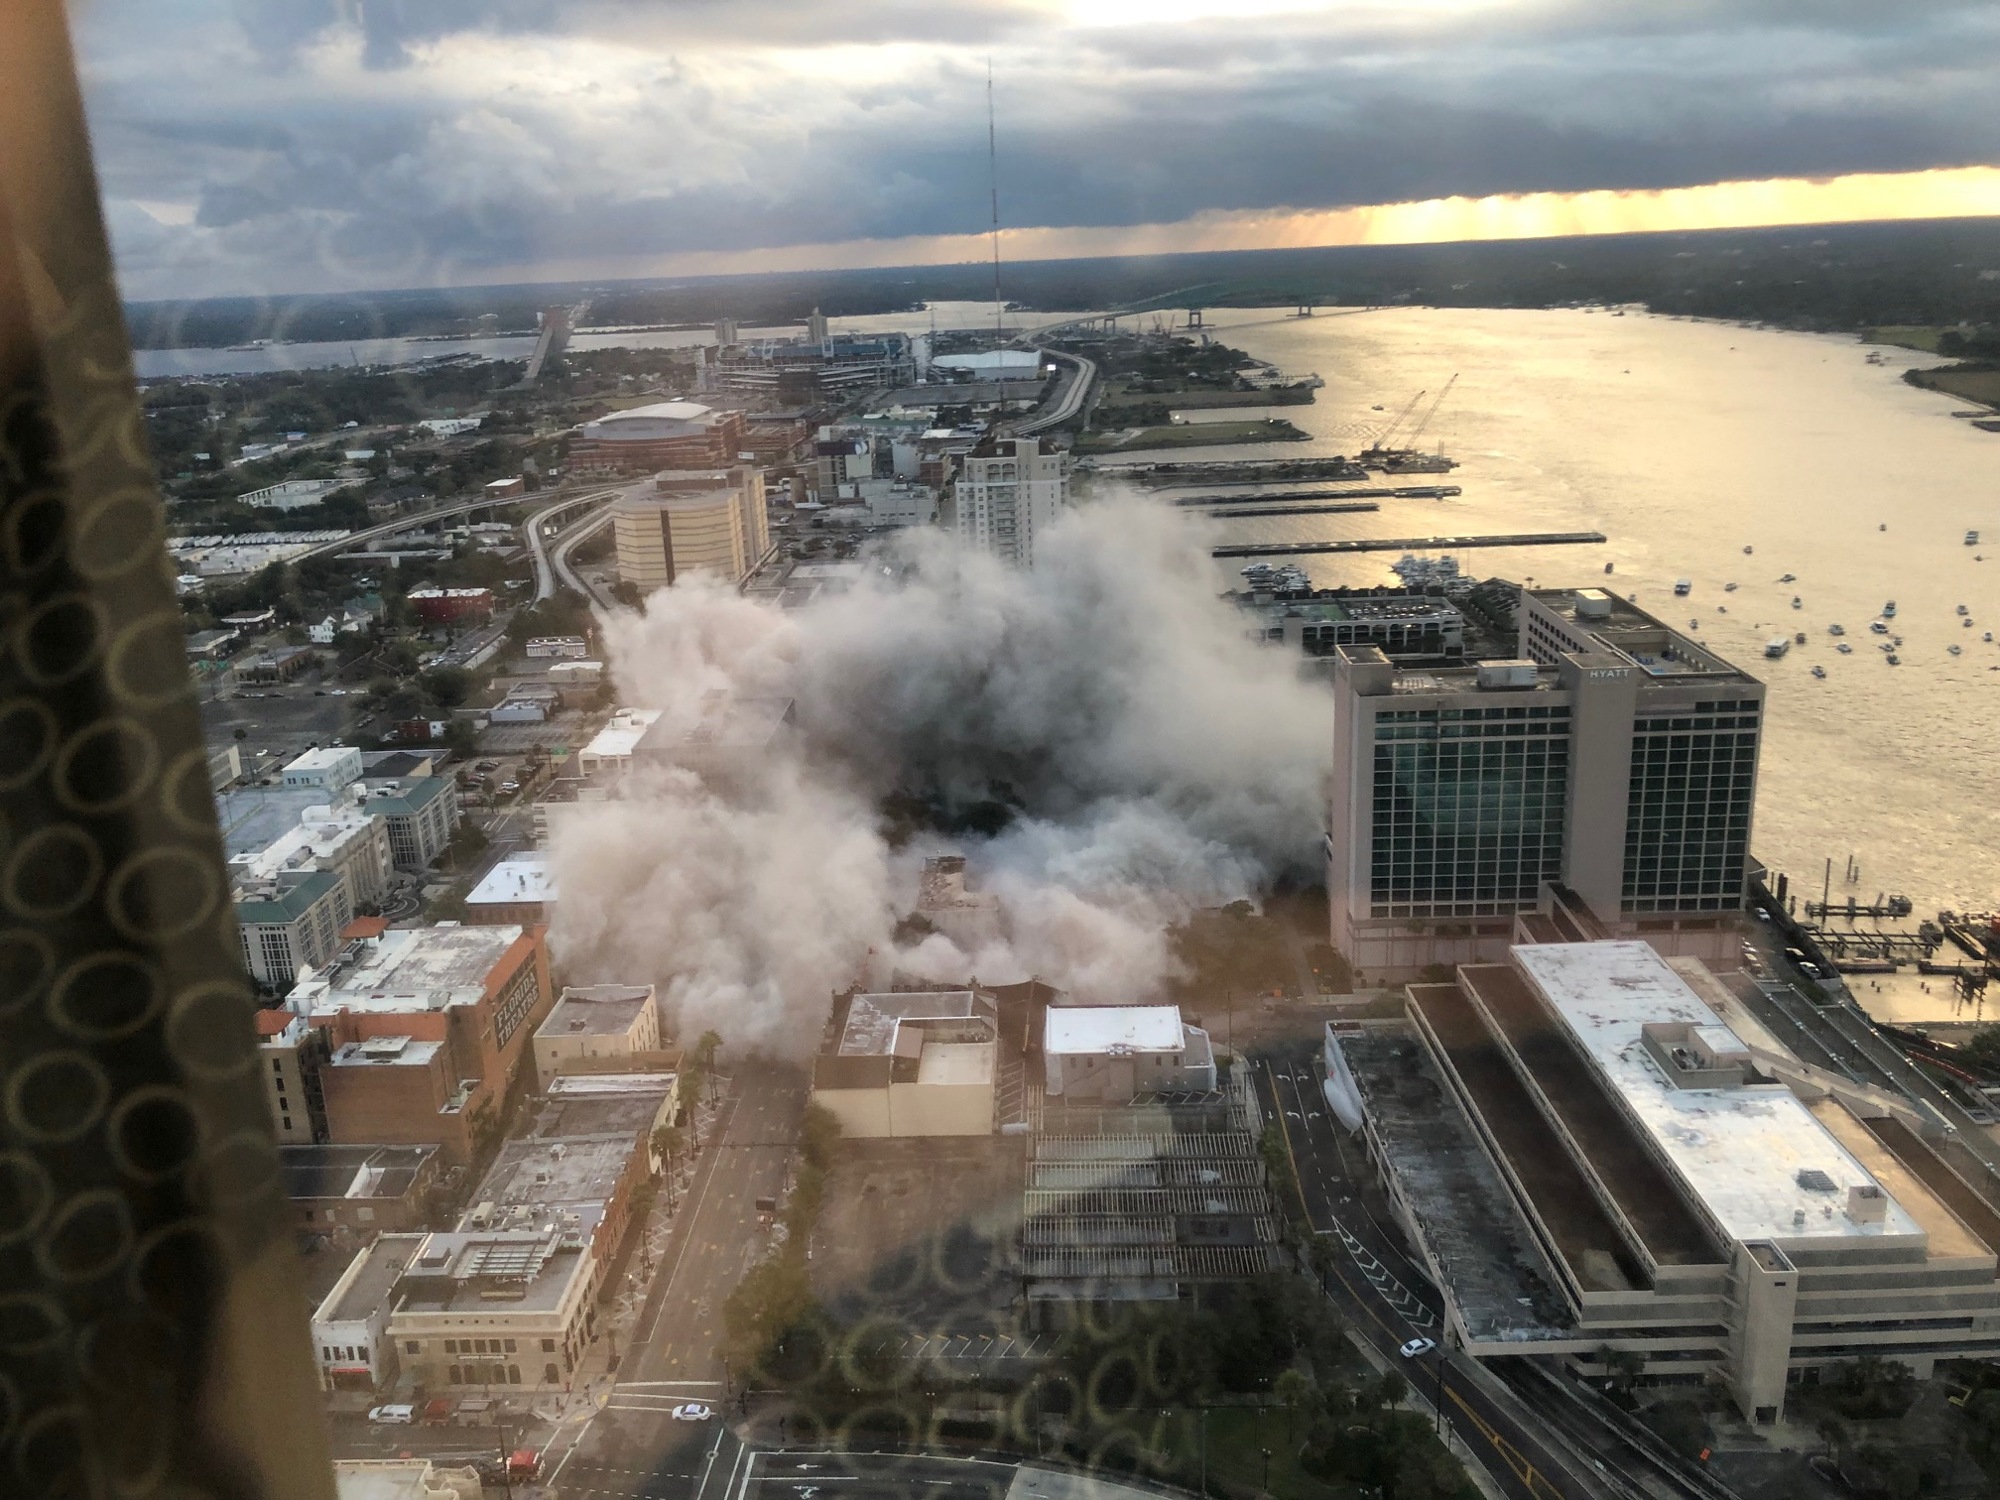 The implosion aftermath from The River Club at Wells Fargo Center. (Photo by Karen Brune Mathis)